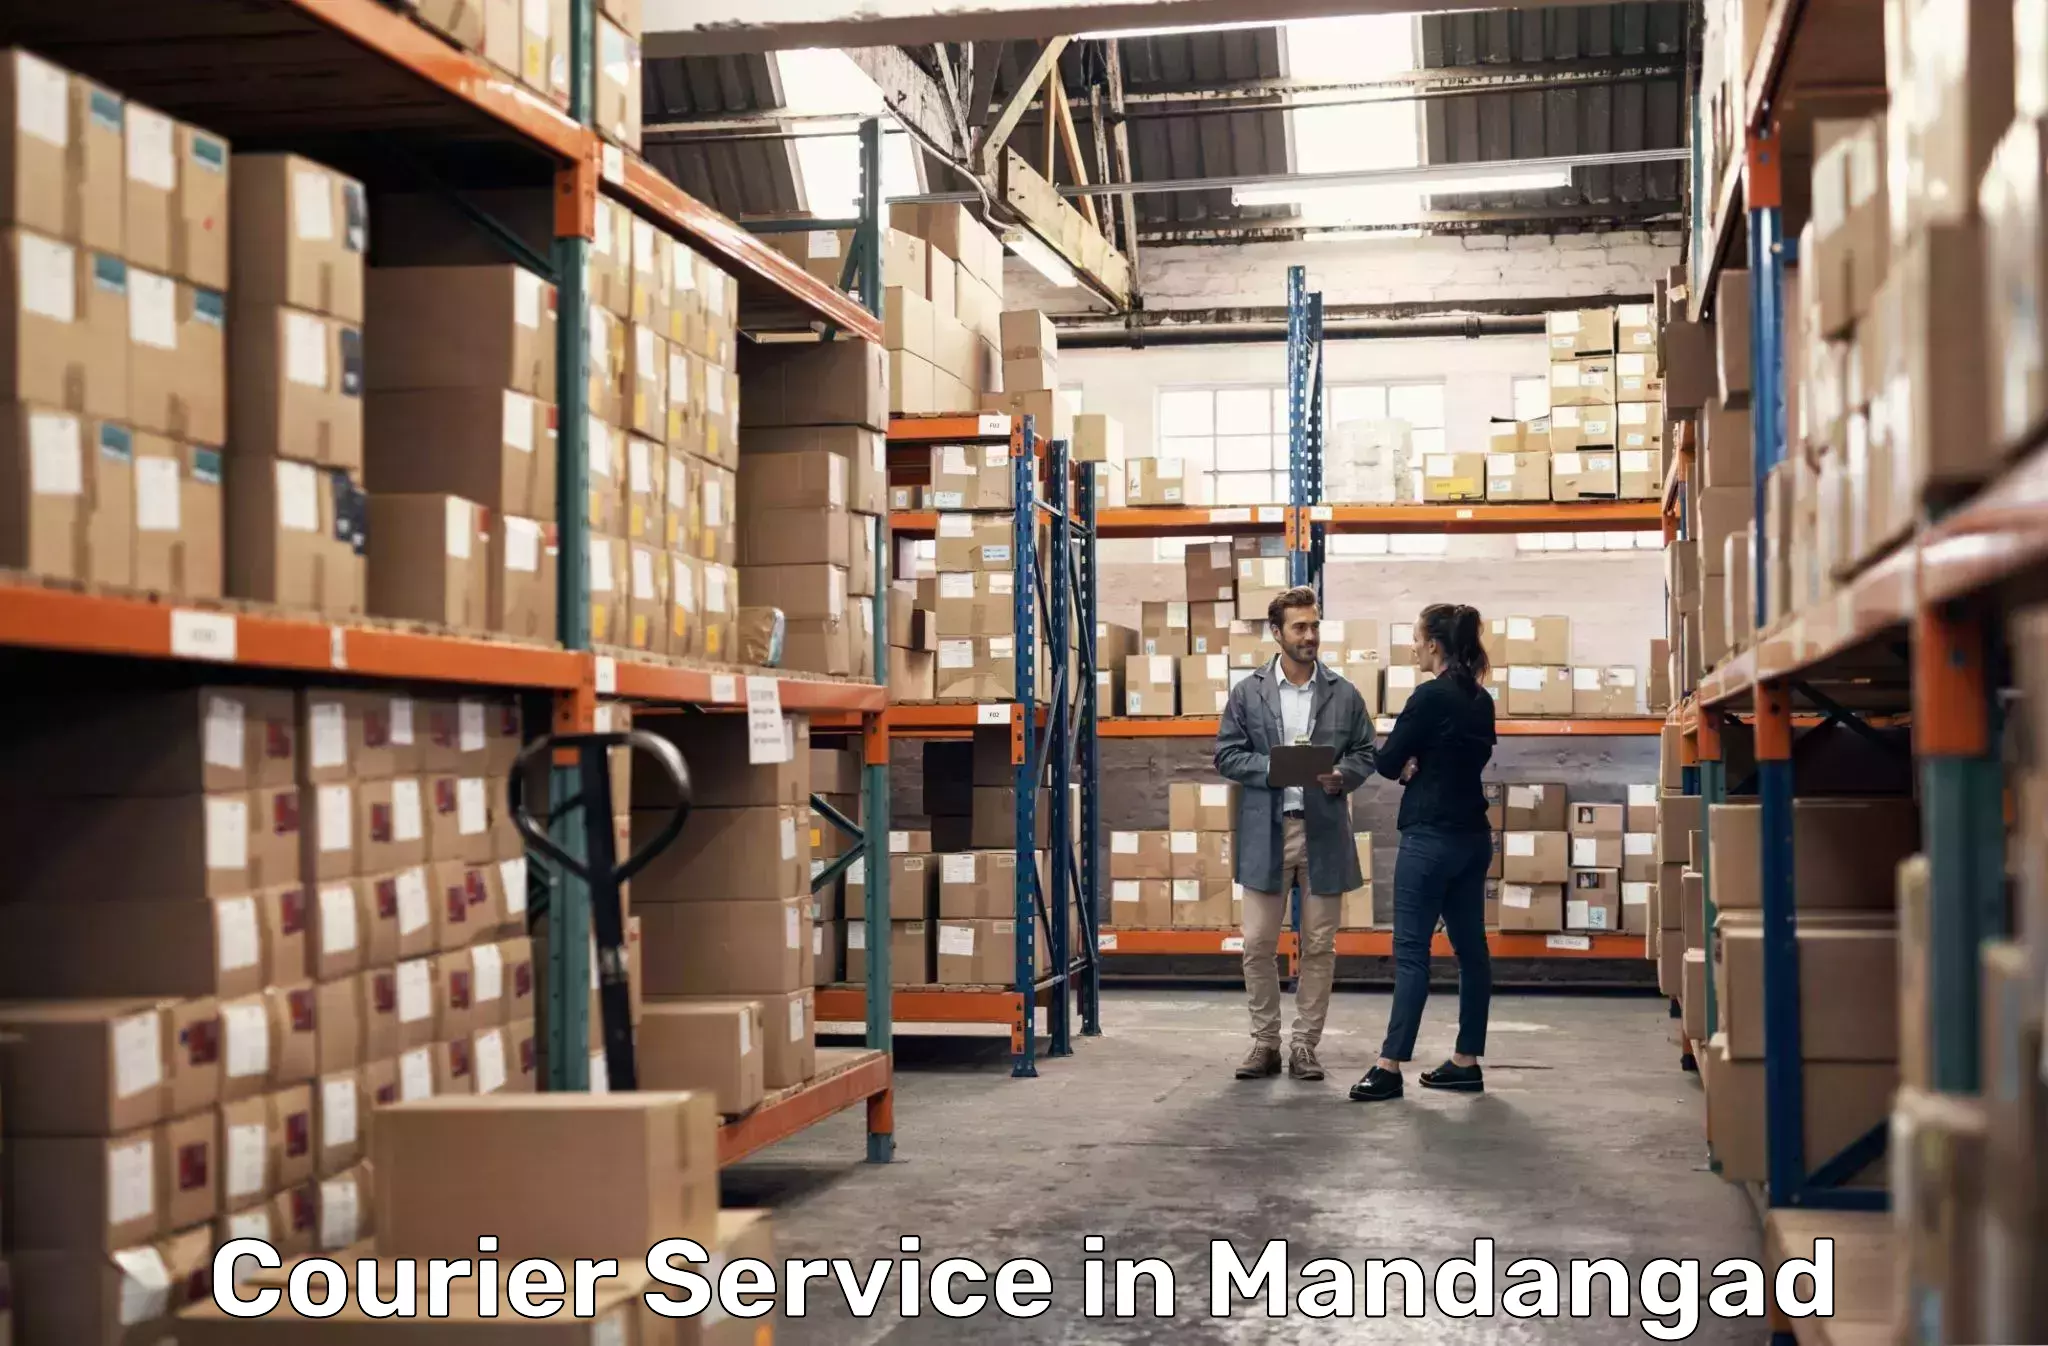 Flexible delivery schedules in Mandangad